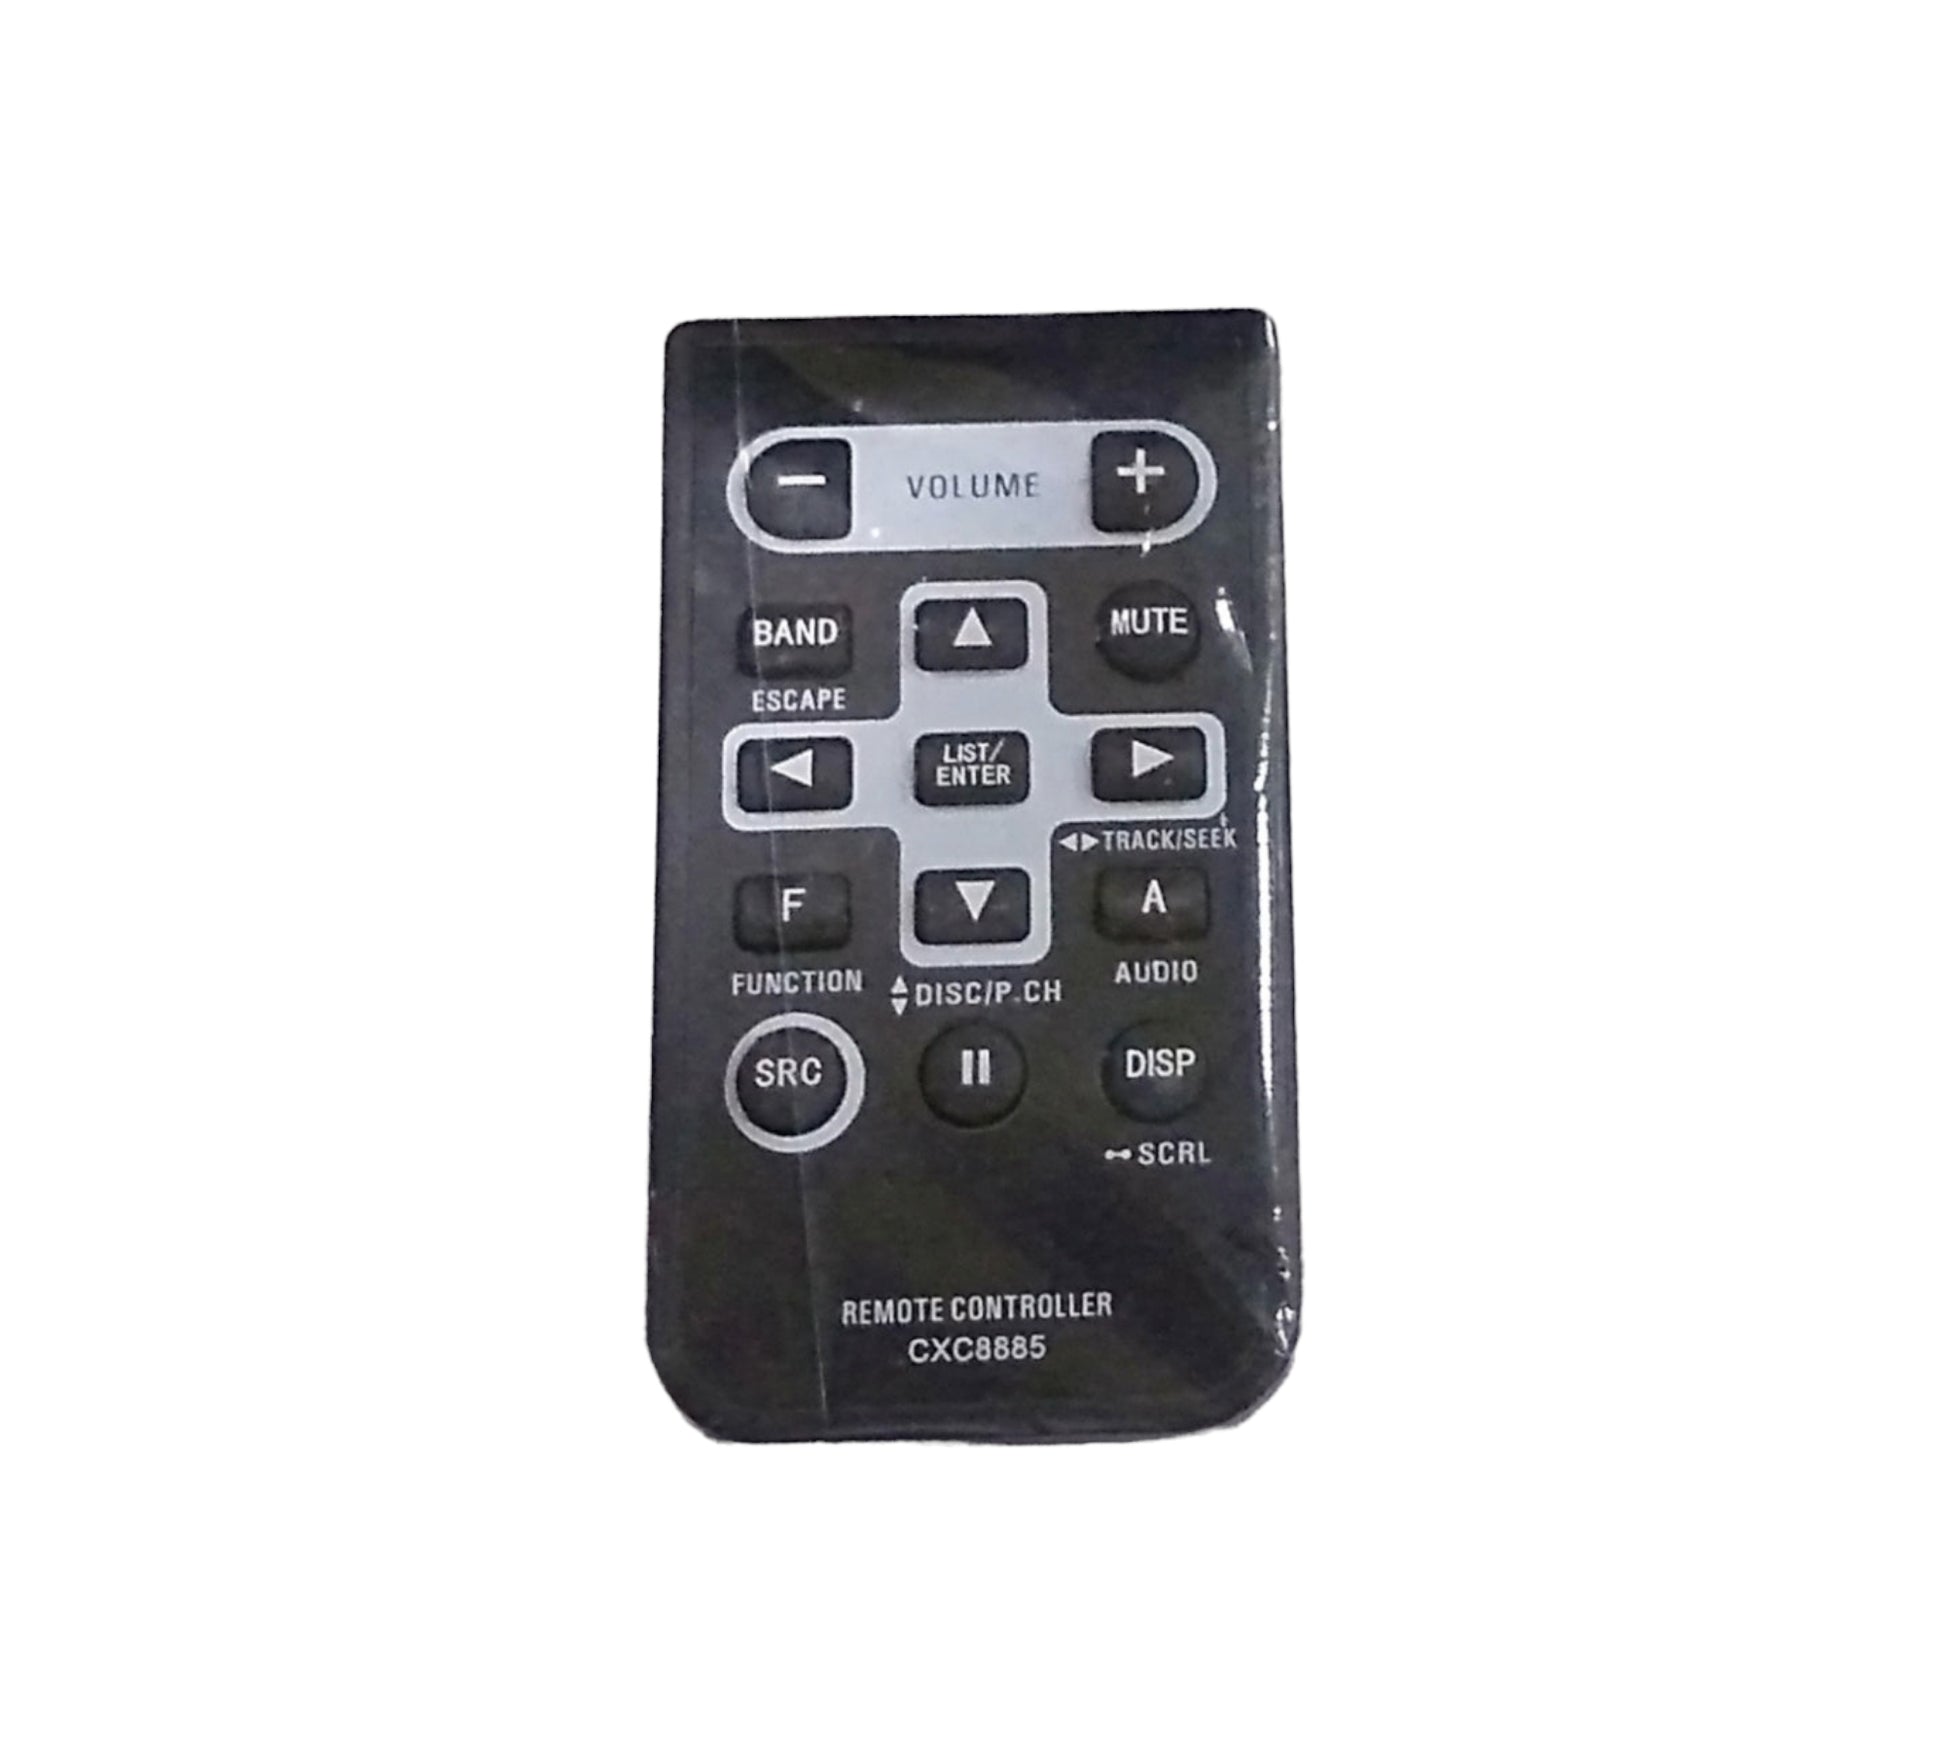 Buy EHOP Cd-R320 Compatible Remote Controller For Pioneer Cd Audio System  Qxe1047 Cxc8885 Cxe3669 Qxa3196Deh-140Ub Deh-14Ub Deh-150Mp Deh-15Mp  Deh-15Ub Deh-1701Ub Deh-2400Ub Deh-240Ub Deh-24Ub Online at Best Prices in  India - JioMart.